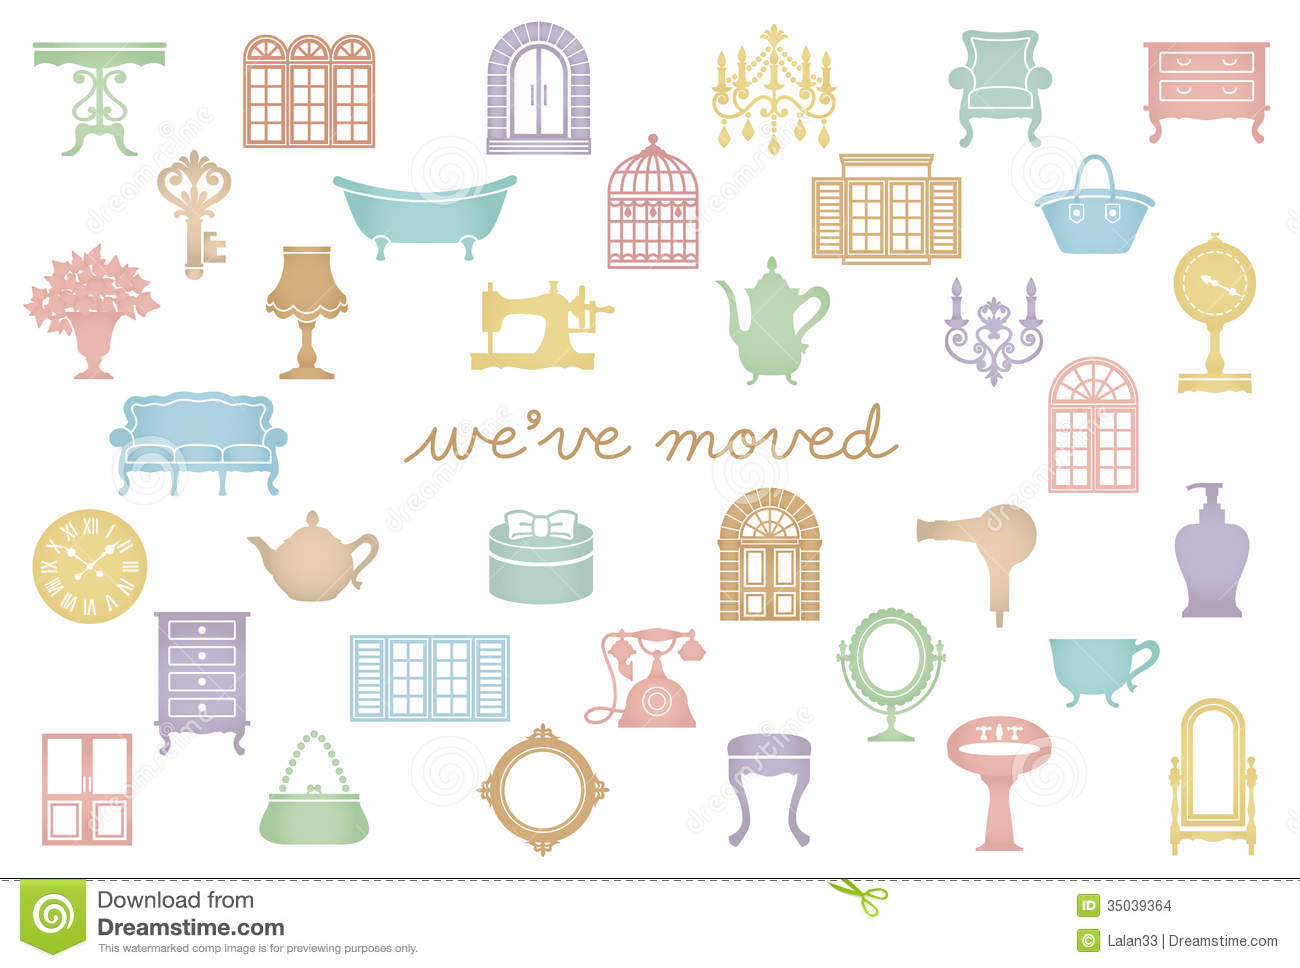 House Moving Greeting Card  We Ve Just Moved  Stock Images   Image